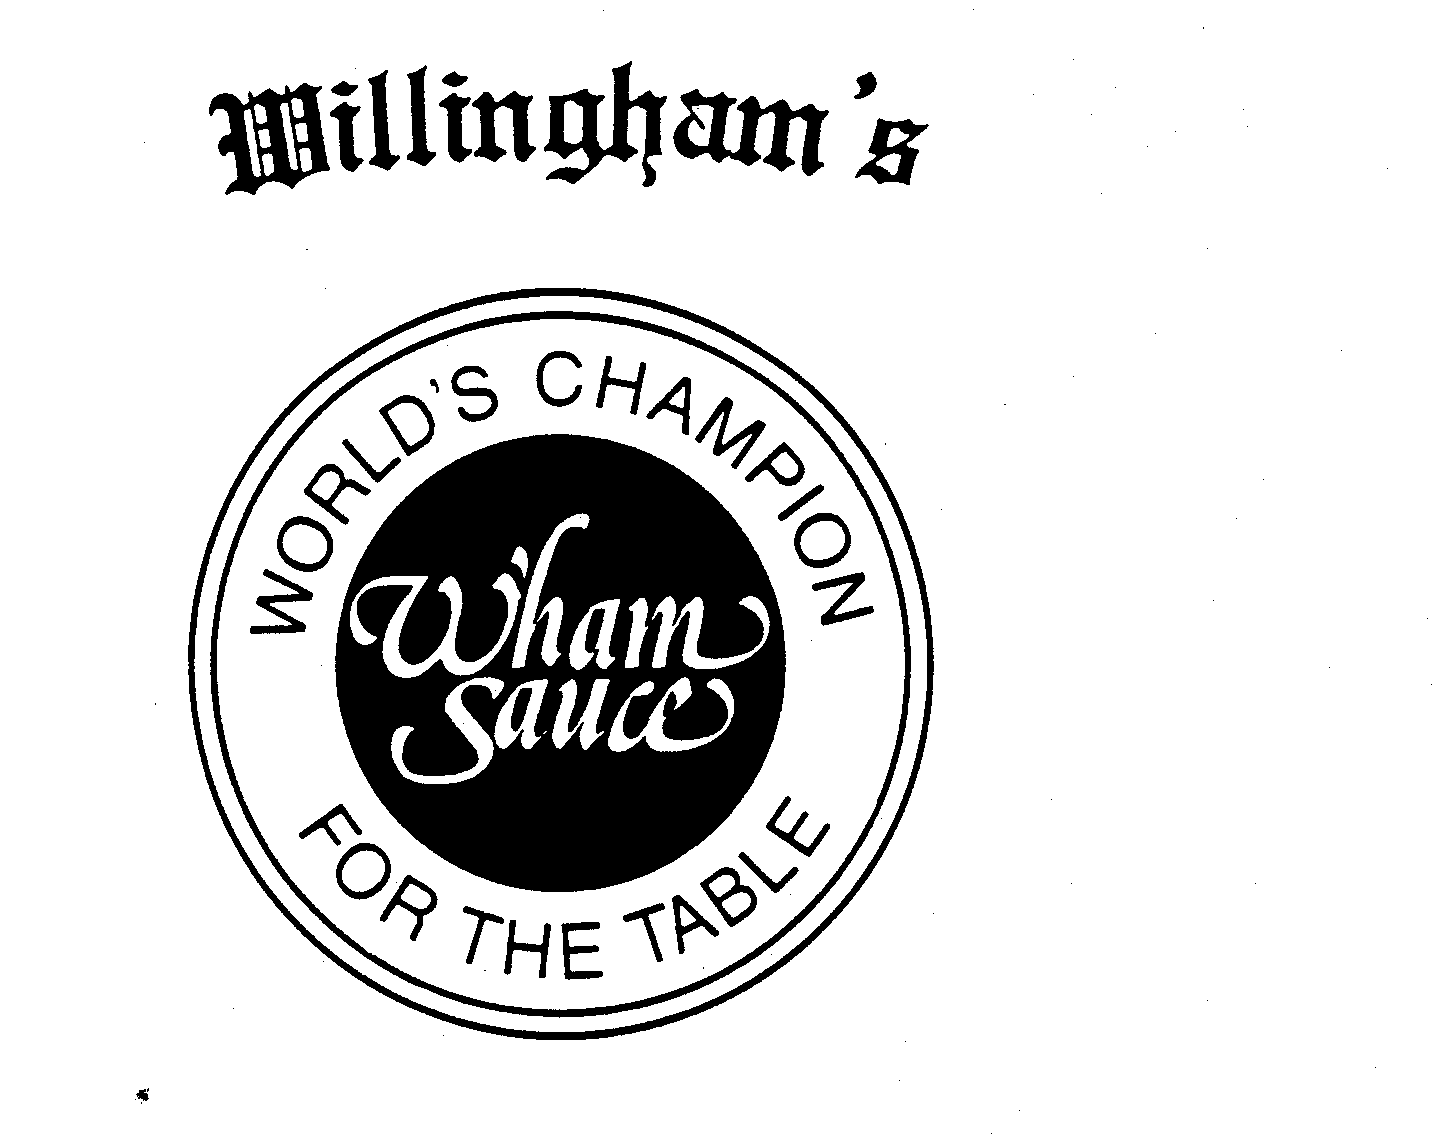  WILLINGHAM'S WHAM SAUCE WORLD'S CHAMPION FOR THE TABLE